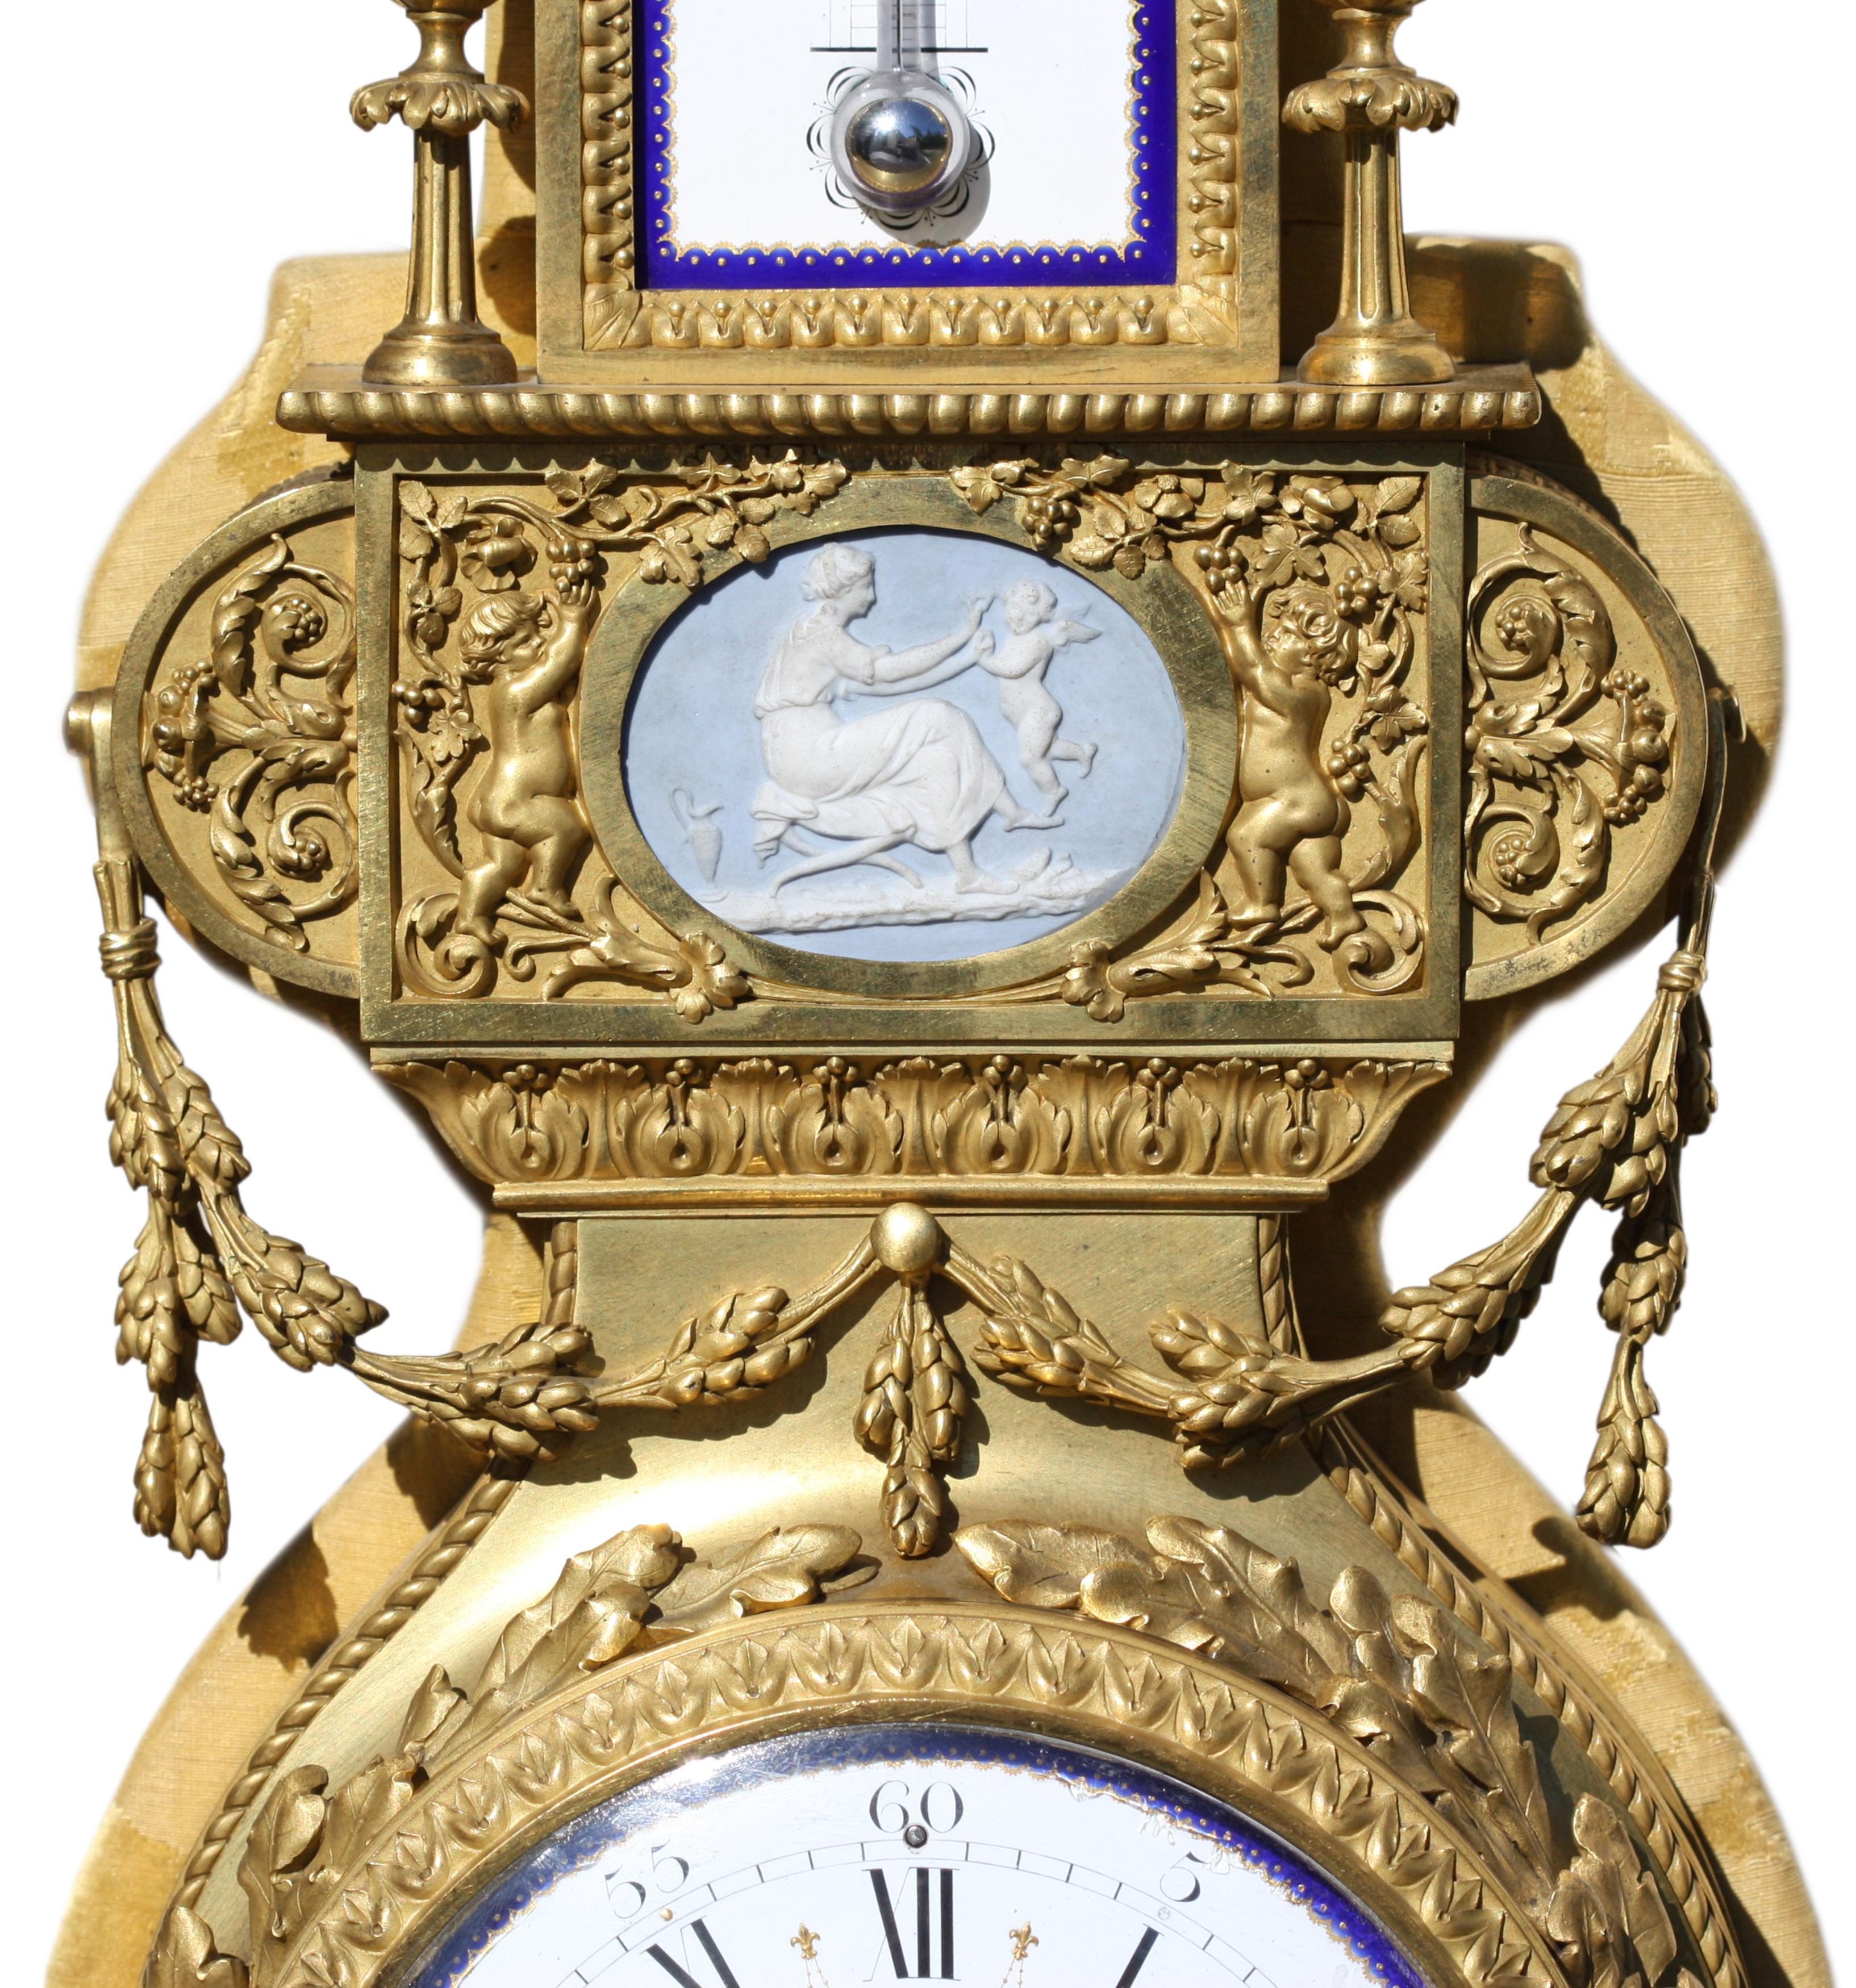 Henry DASSON (1825-1896)
A Fine Louis XVI Style Porcelain Mounted Ormolu Cartel Clock and Matching Barometer by Henry Dasson, Paris 1882 and 1878.
Both incorporating thermometers, one Centigrade and one Reaumur scale, noting record Parisian